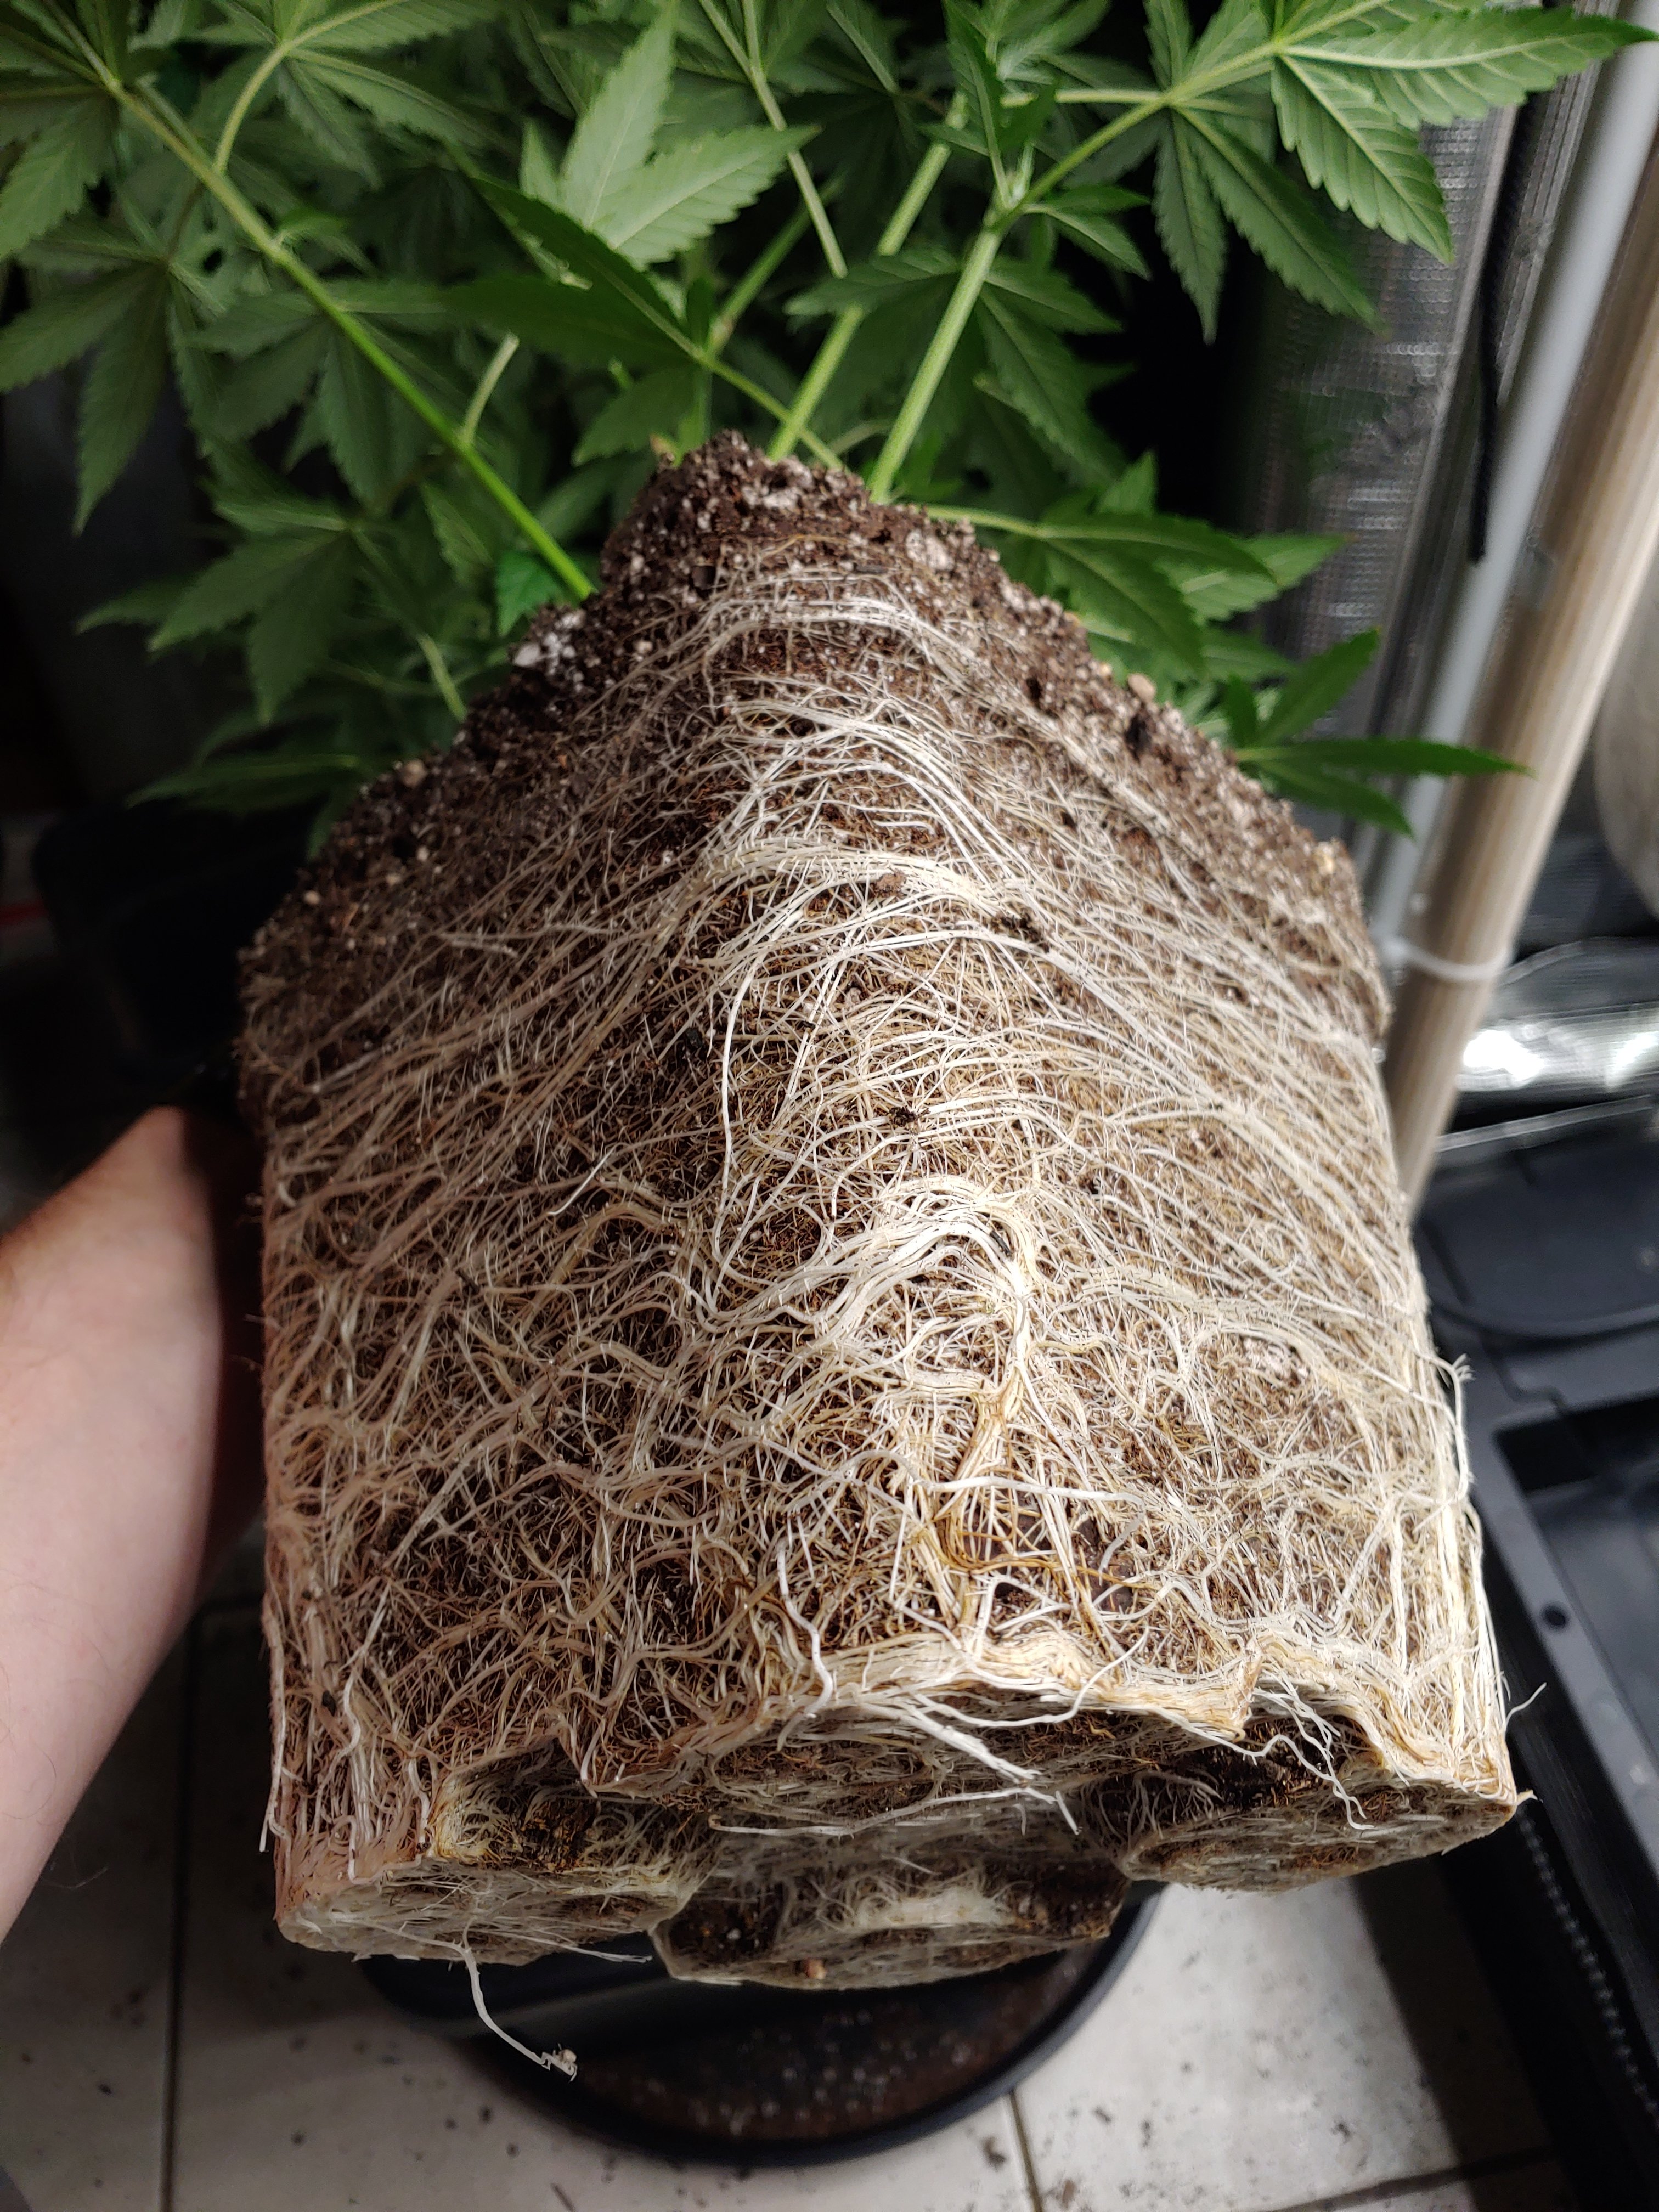 What do you guys think of Air pots instead of fabric pots - THCFarmer